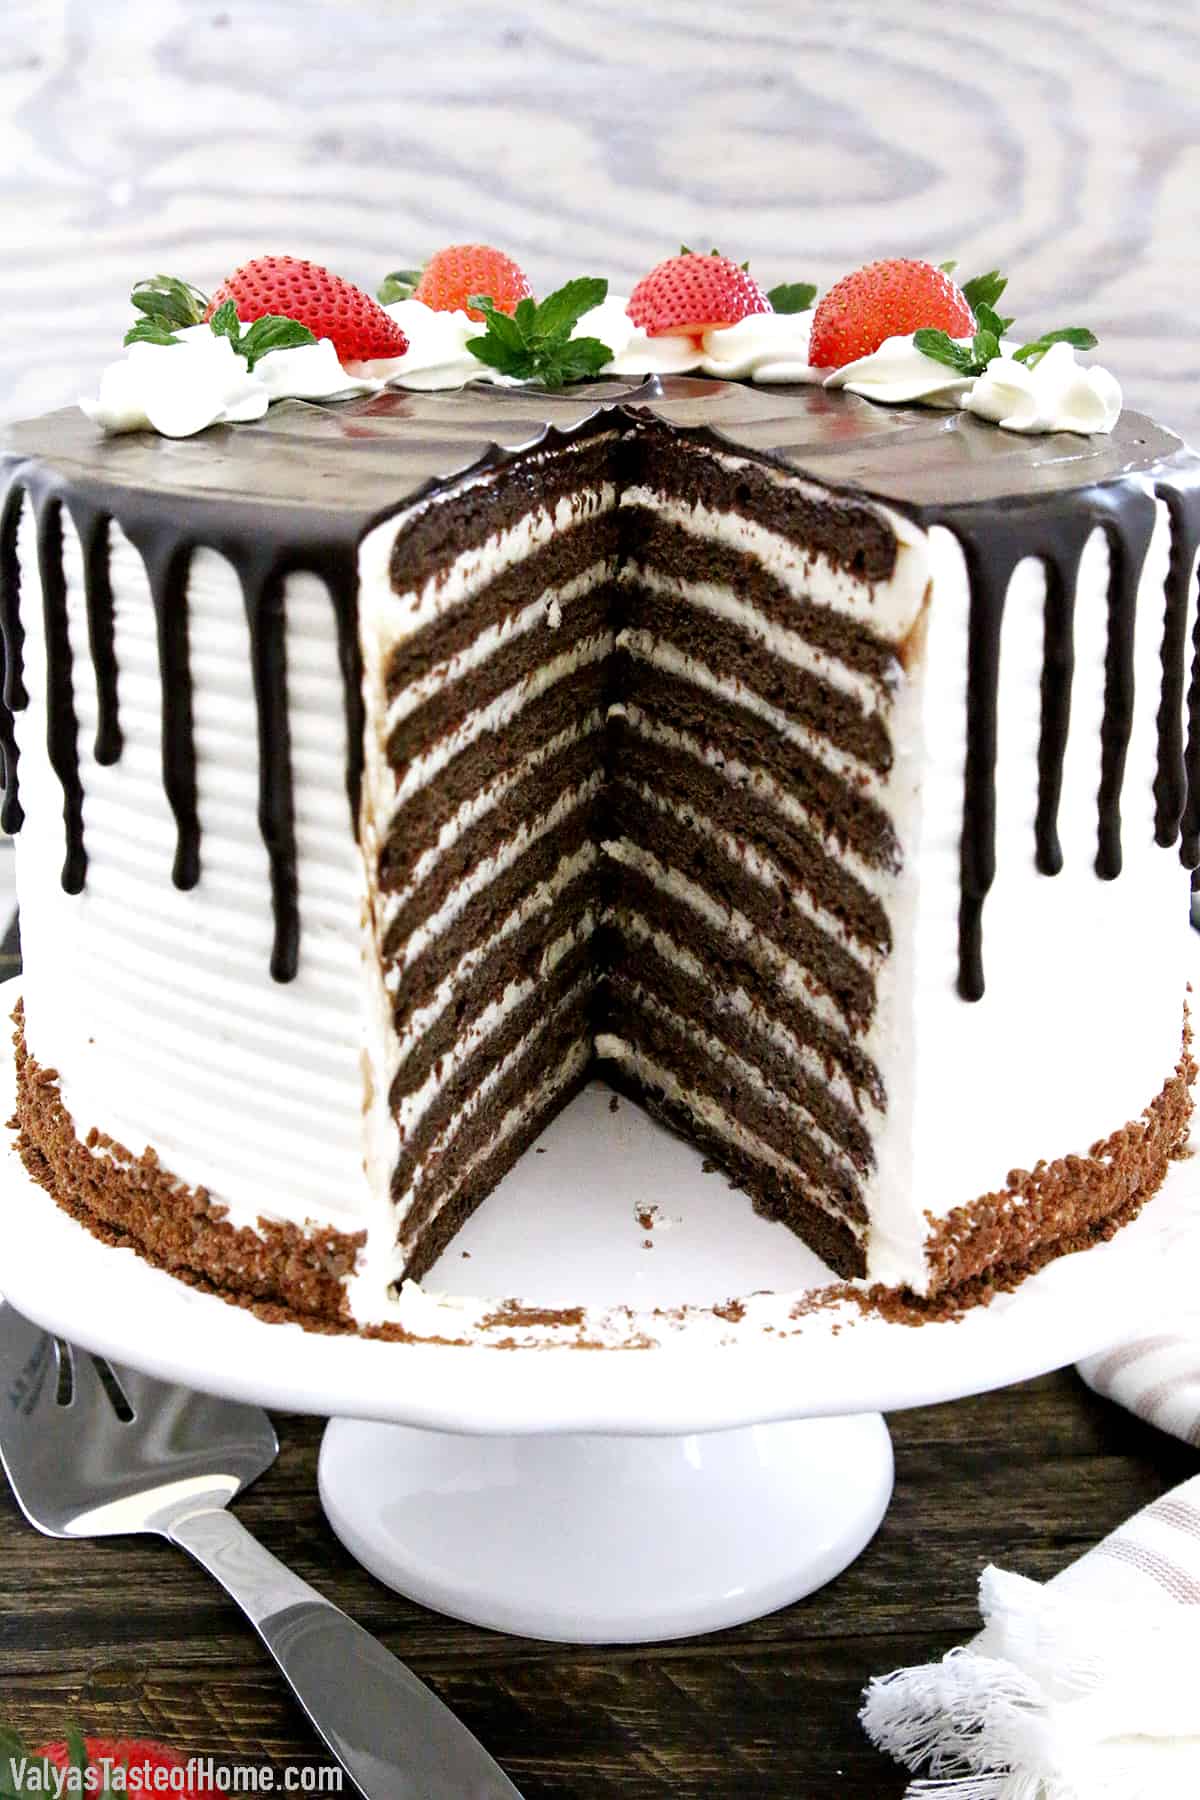 The Best Chocolate Spartak Cake is truly amazing and one of the best! It has many thin layers of soft and moist chocolatey delight with smooth and delicate frosting.